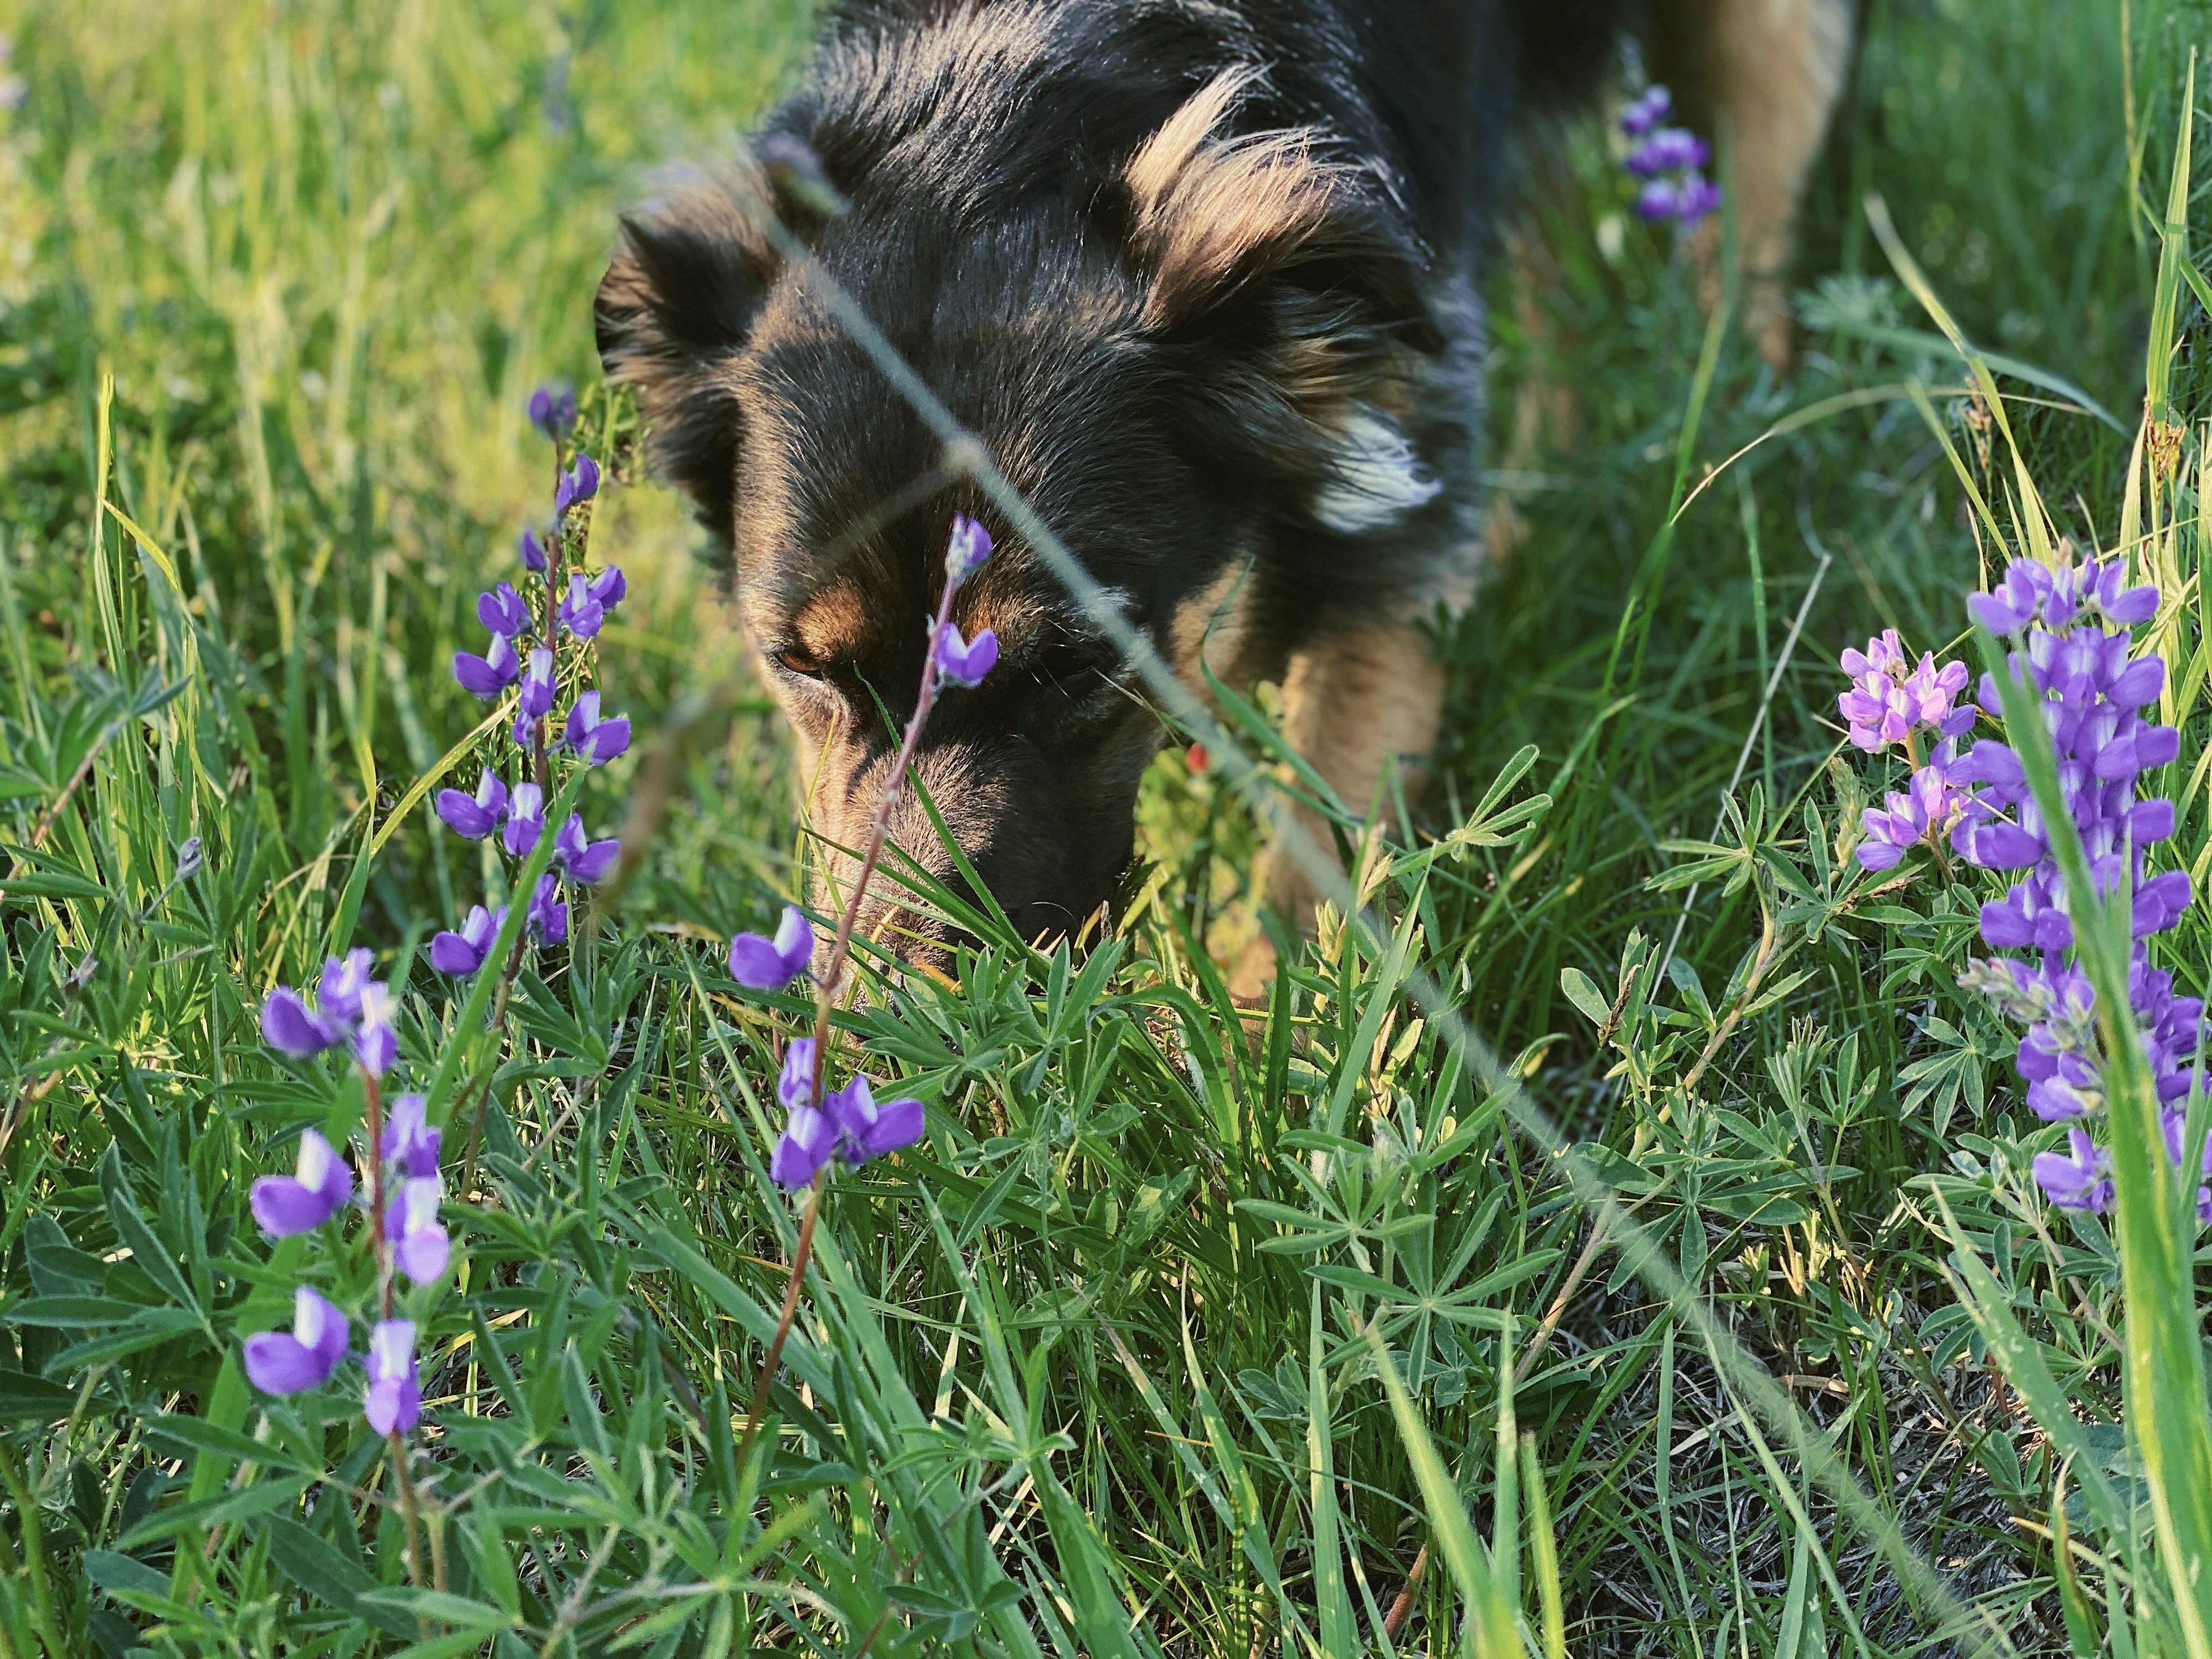 Lennon noses around the grass and wildflowers sniffing.